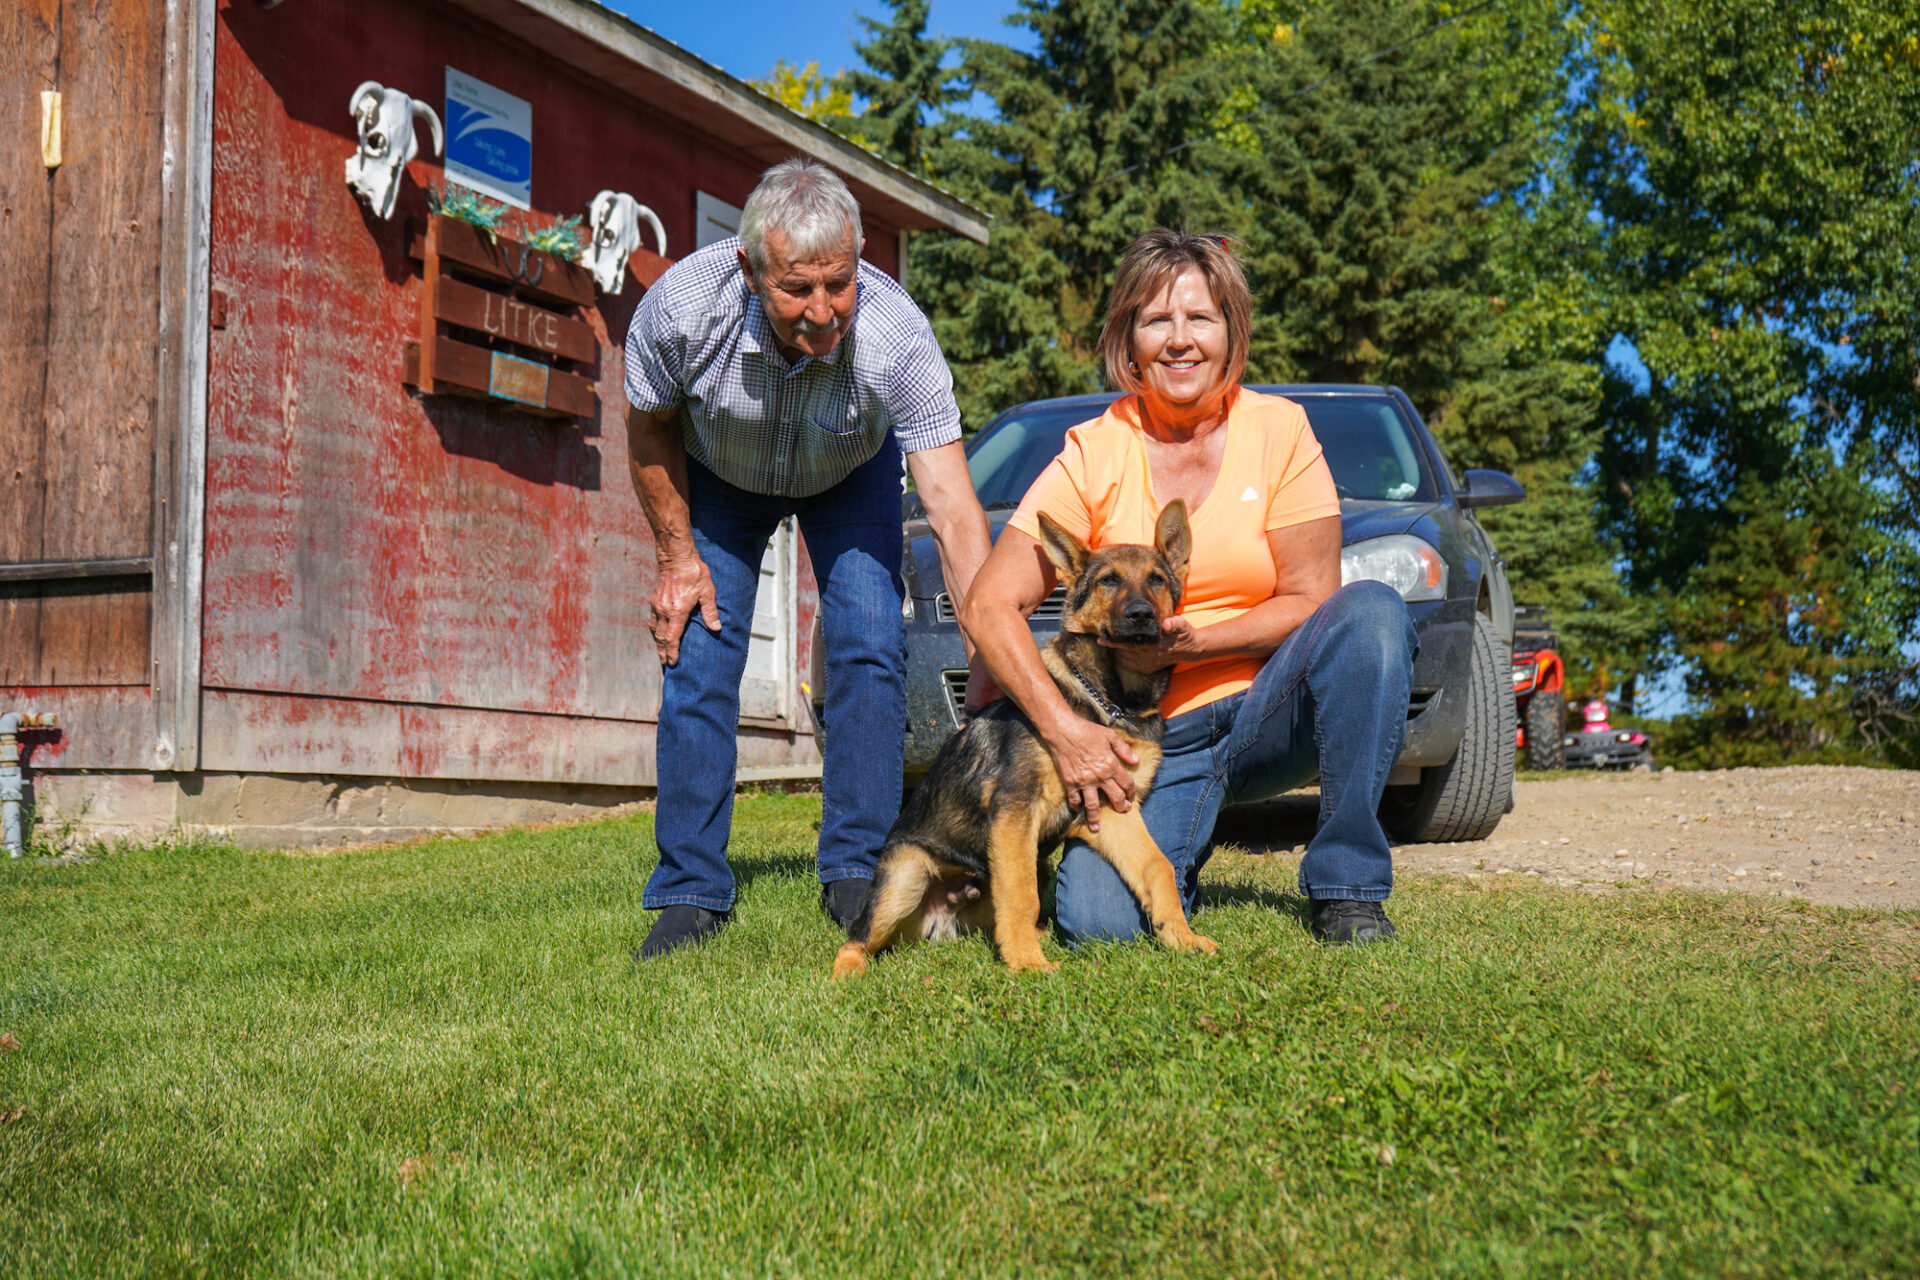 Leslie and Valerie Litke with their dog, from ALUS Lac Ste. Anne, Alberta.